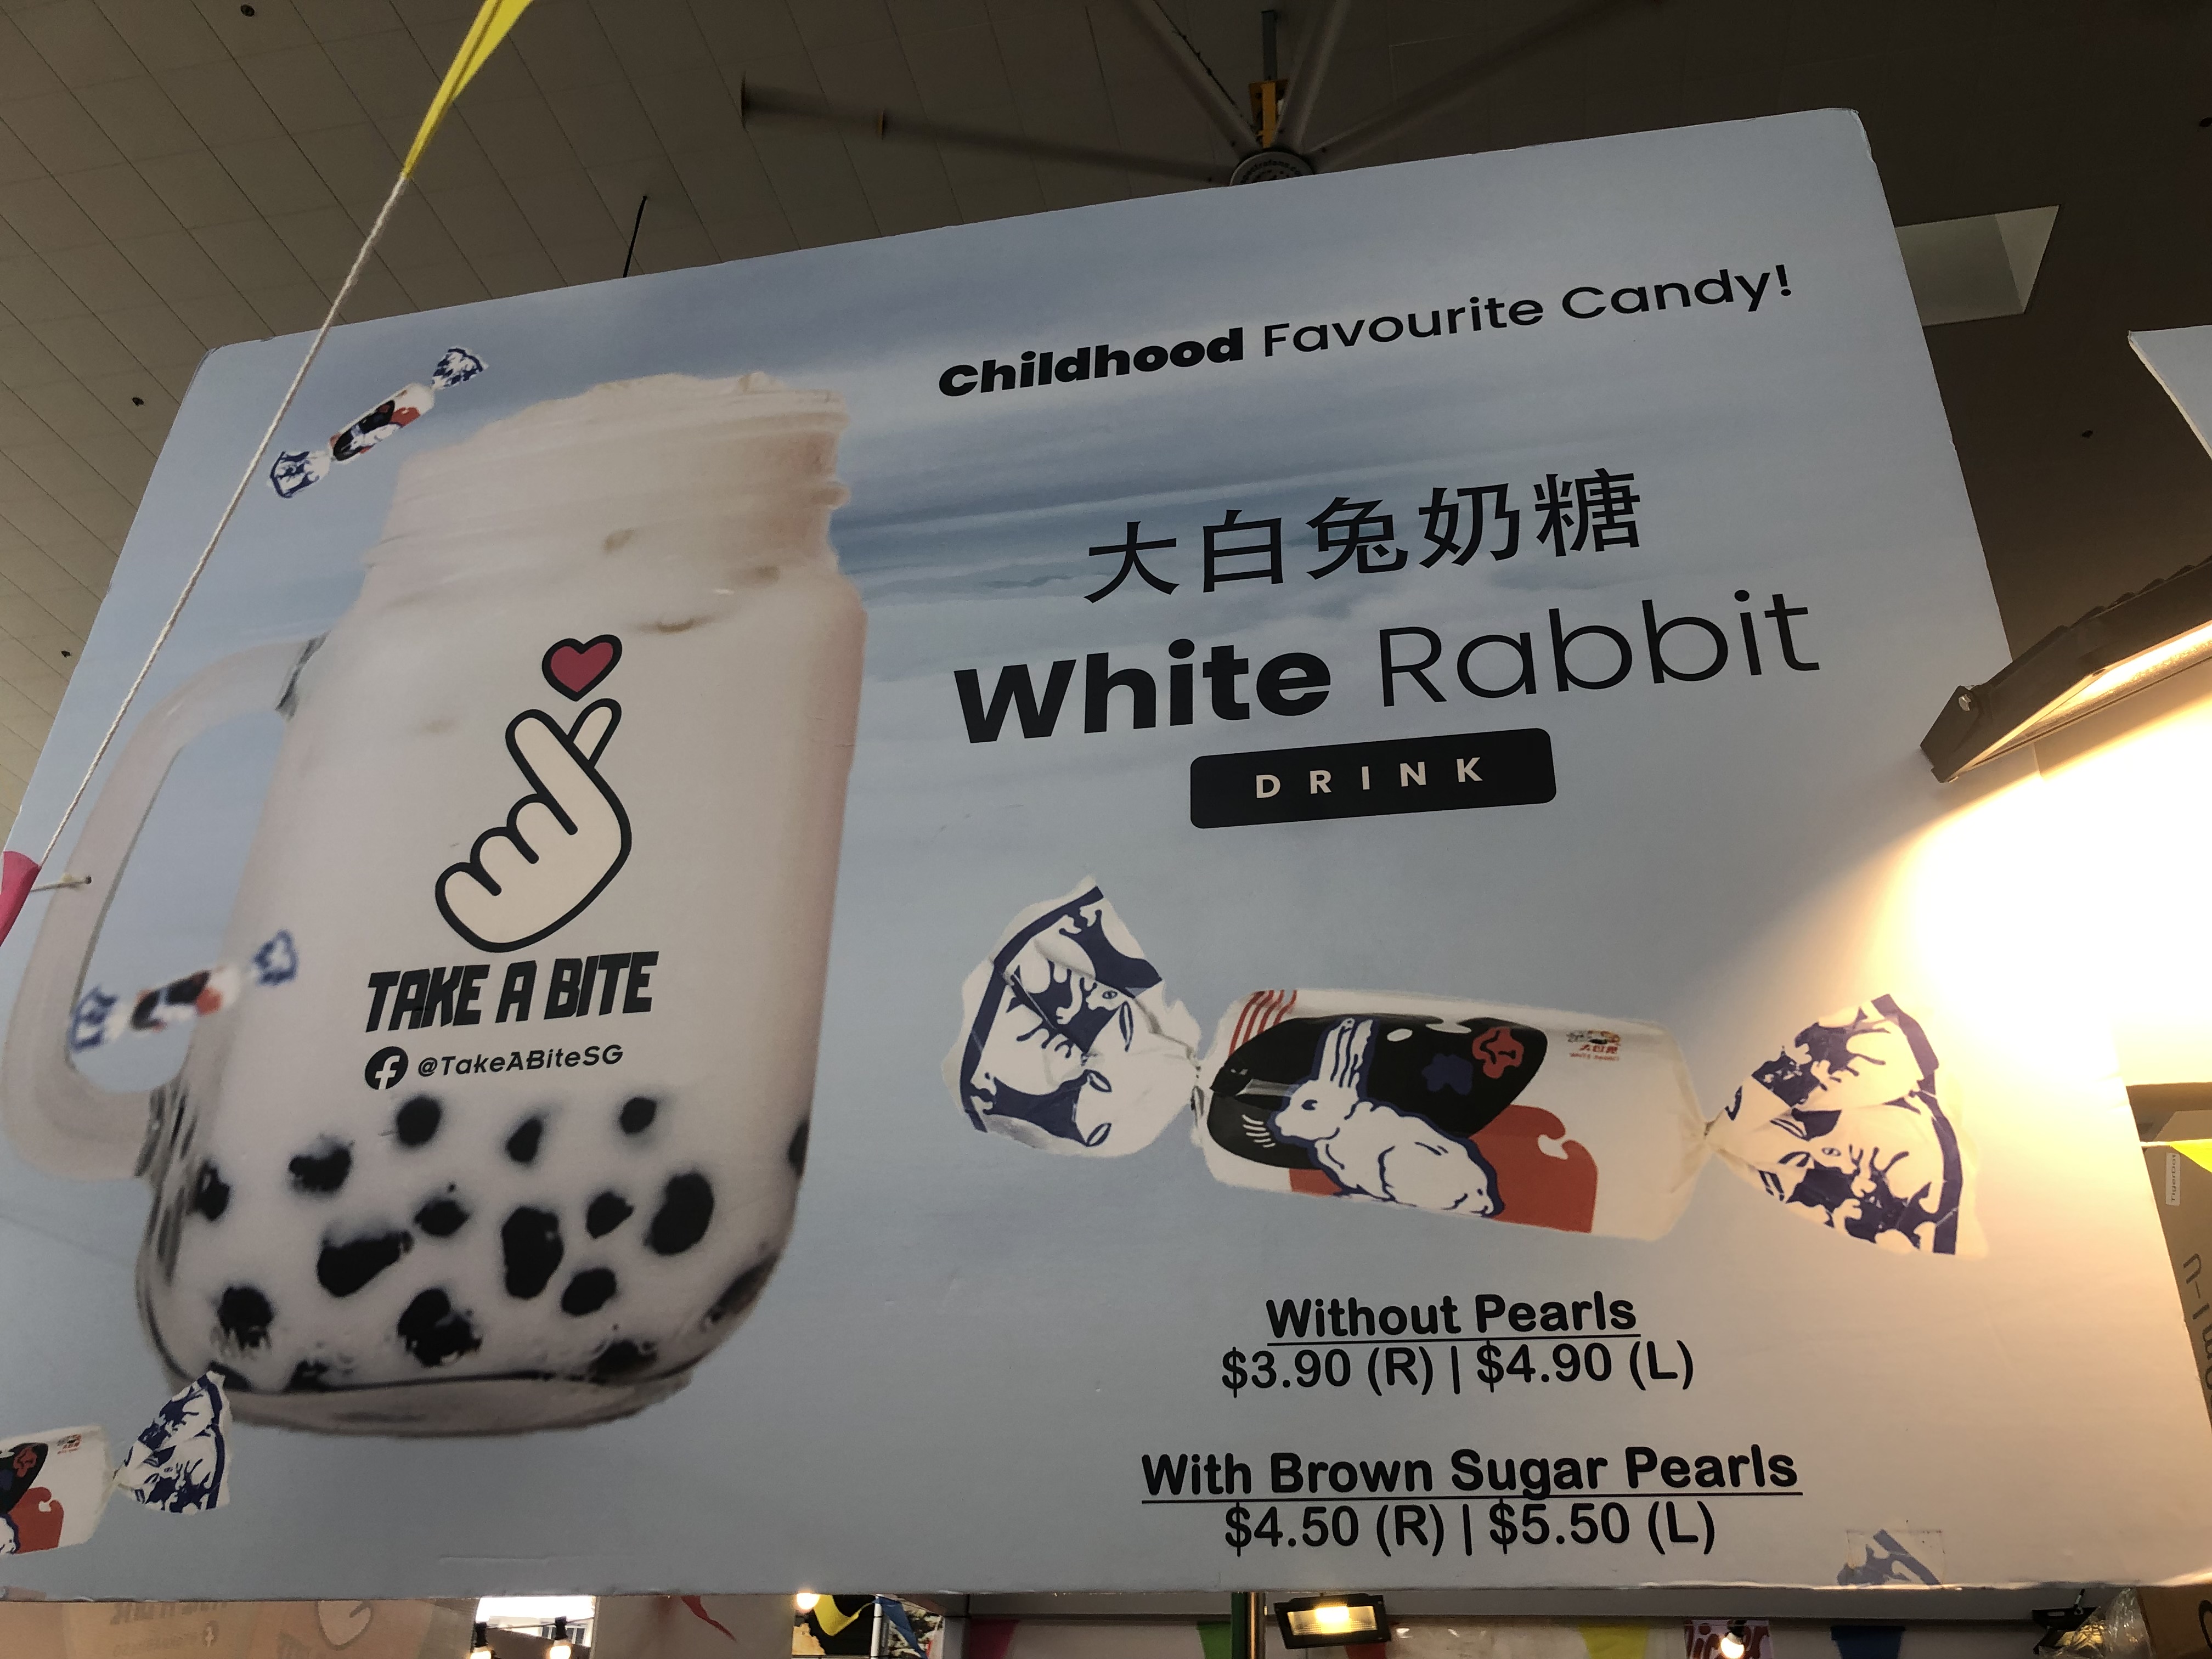 There is a pop-up store selling White Rabbit Bubble Milk outside Bedok Mall - 3